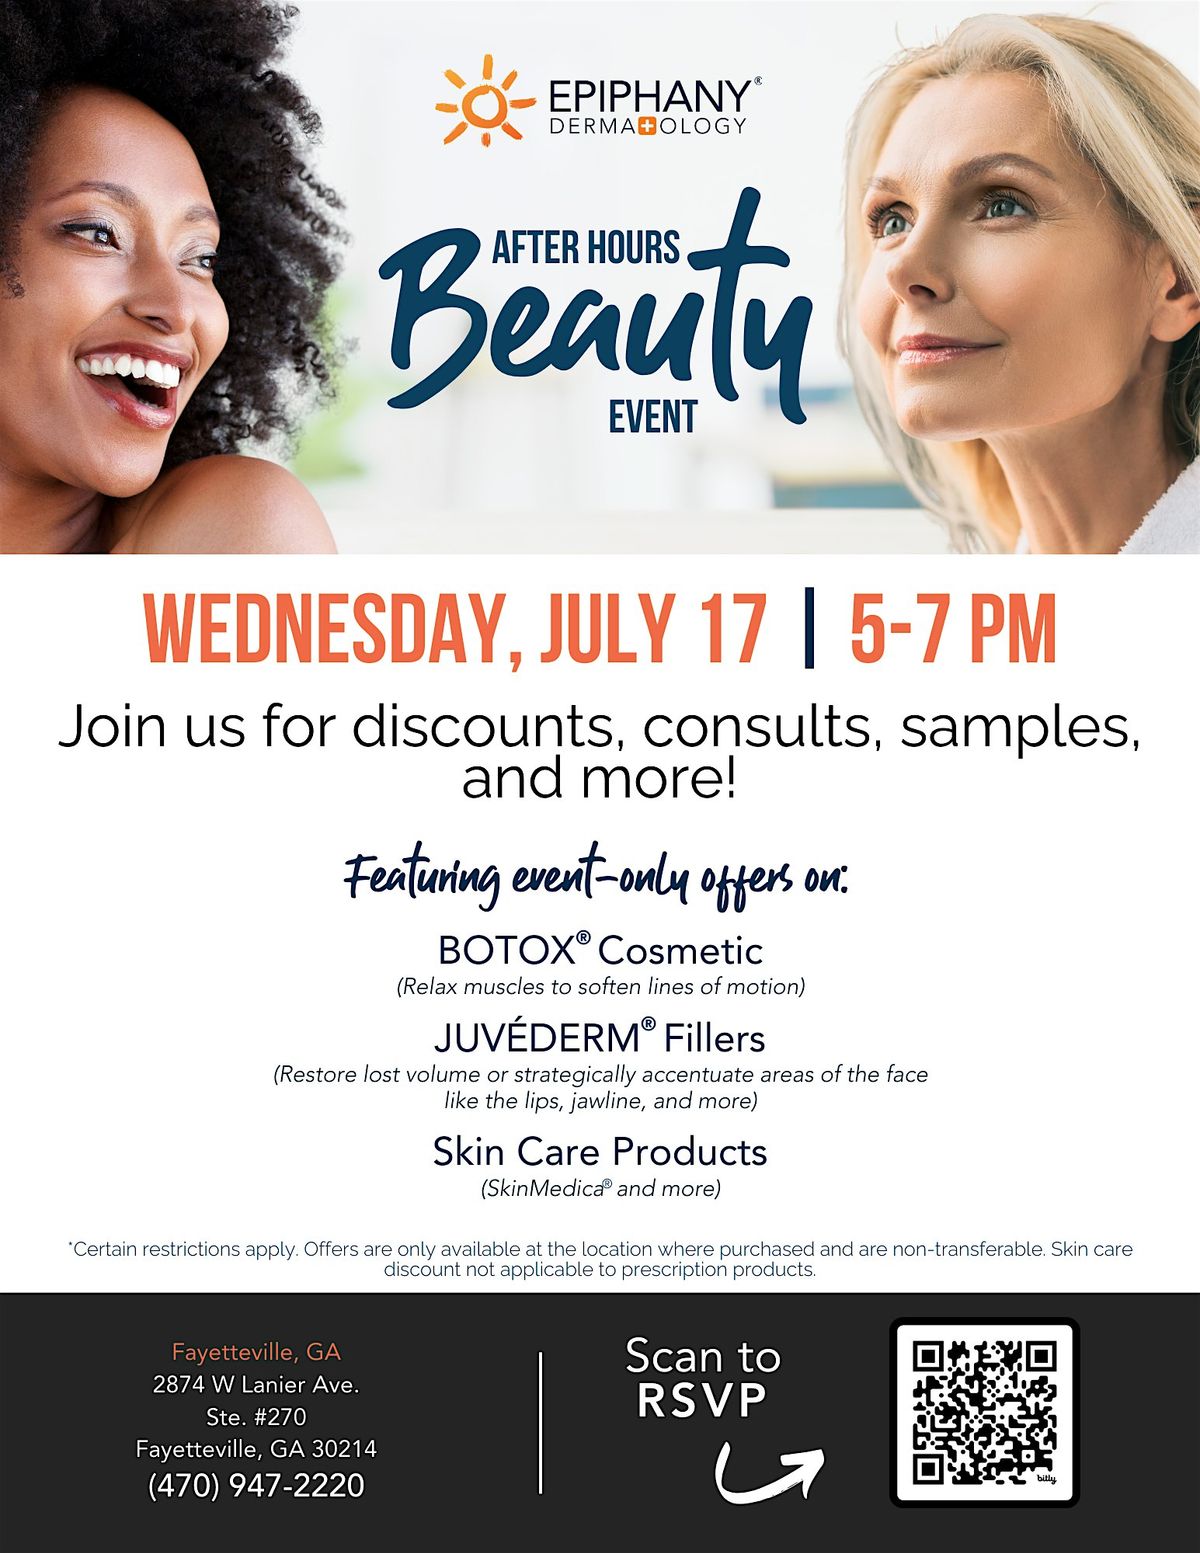 Epiphany Dermatology - Beauty After Hours